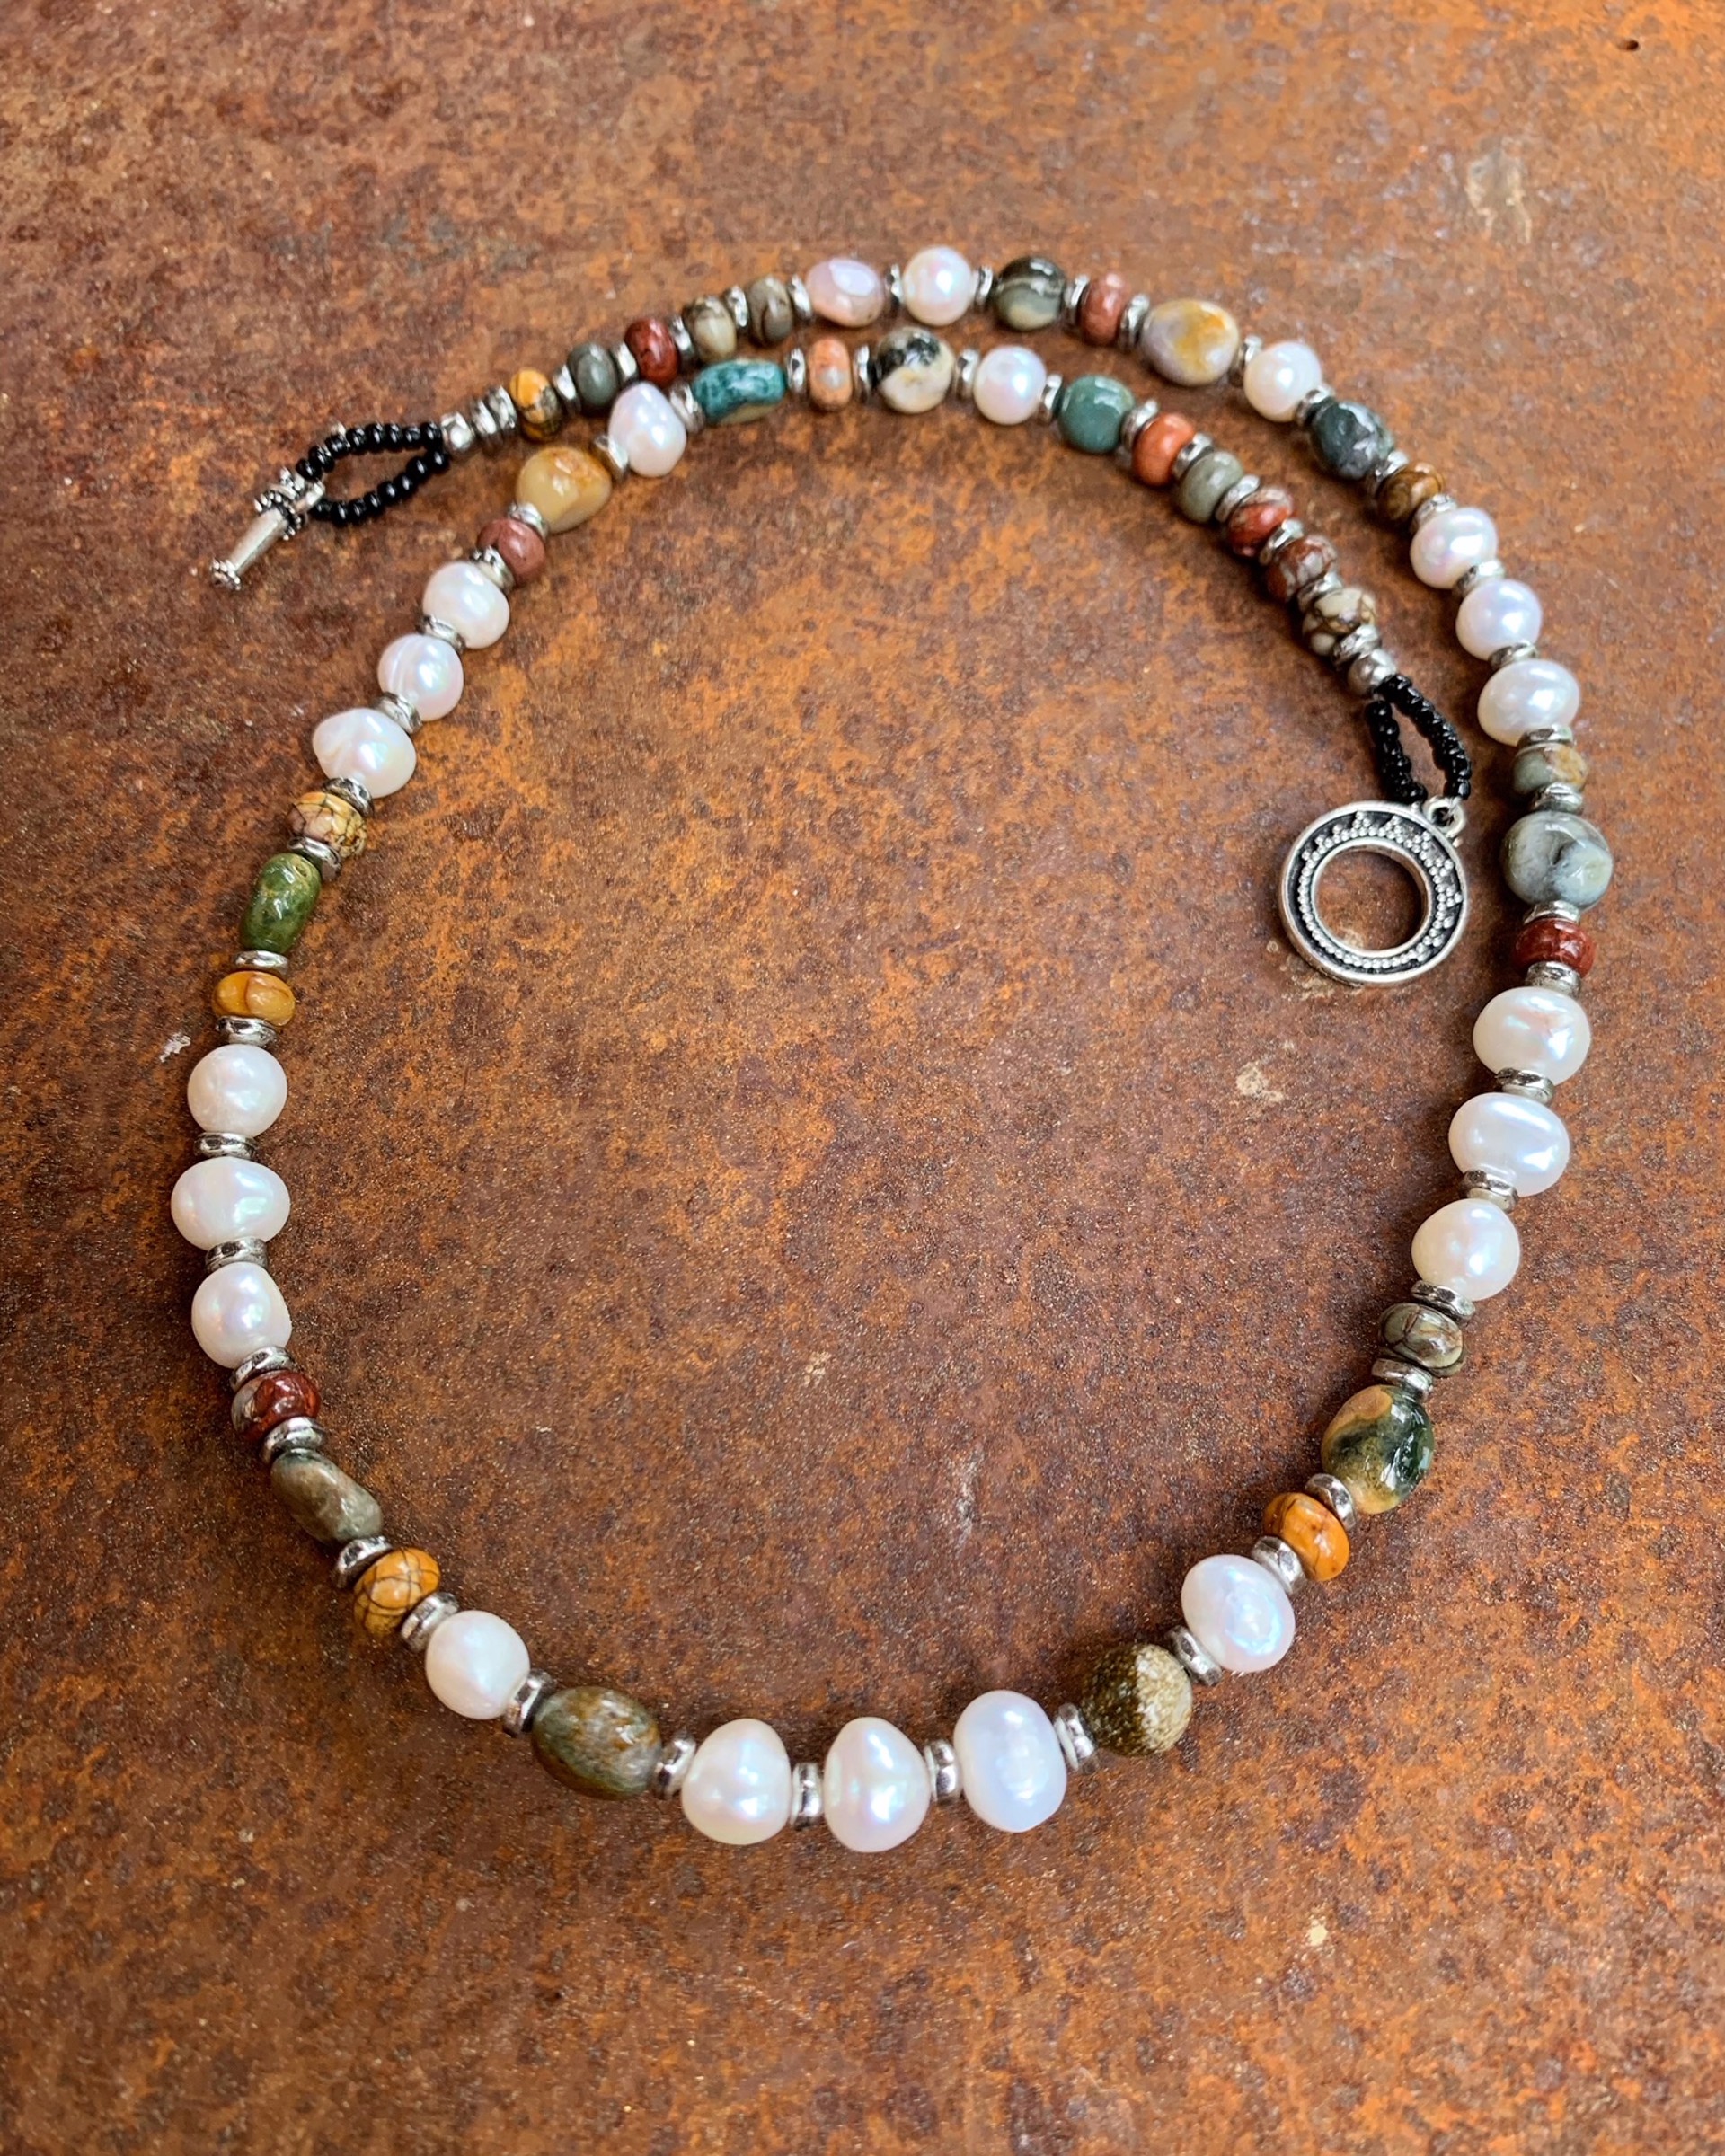 K859 Cultured Pearl Necklace with Jasper by Kelly Ormsby